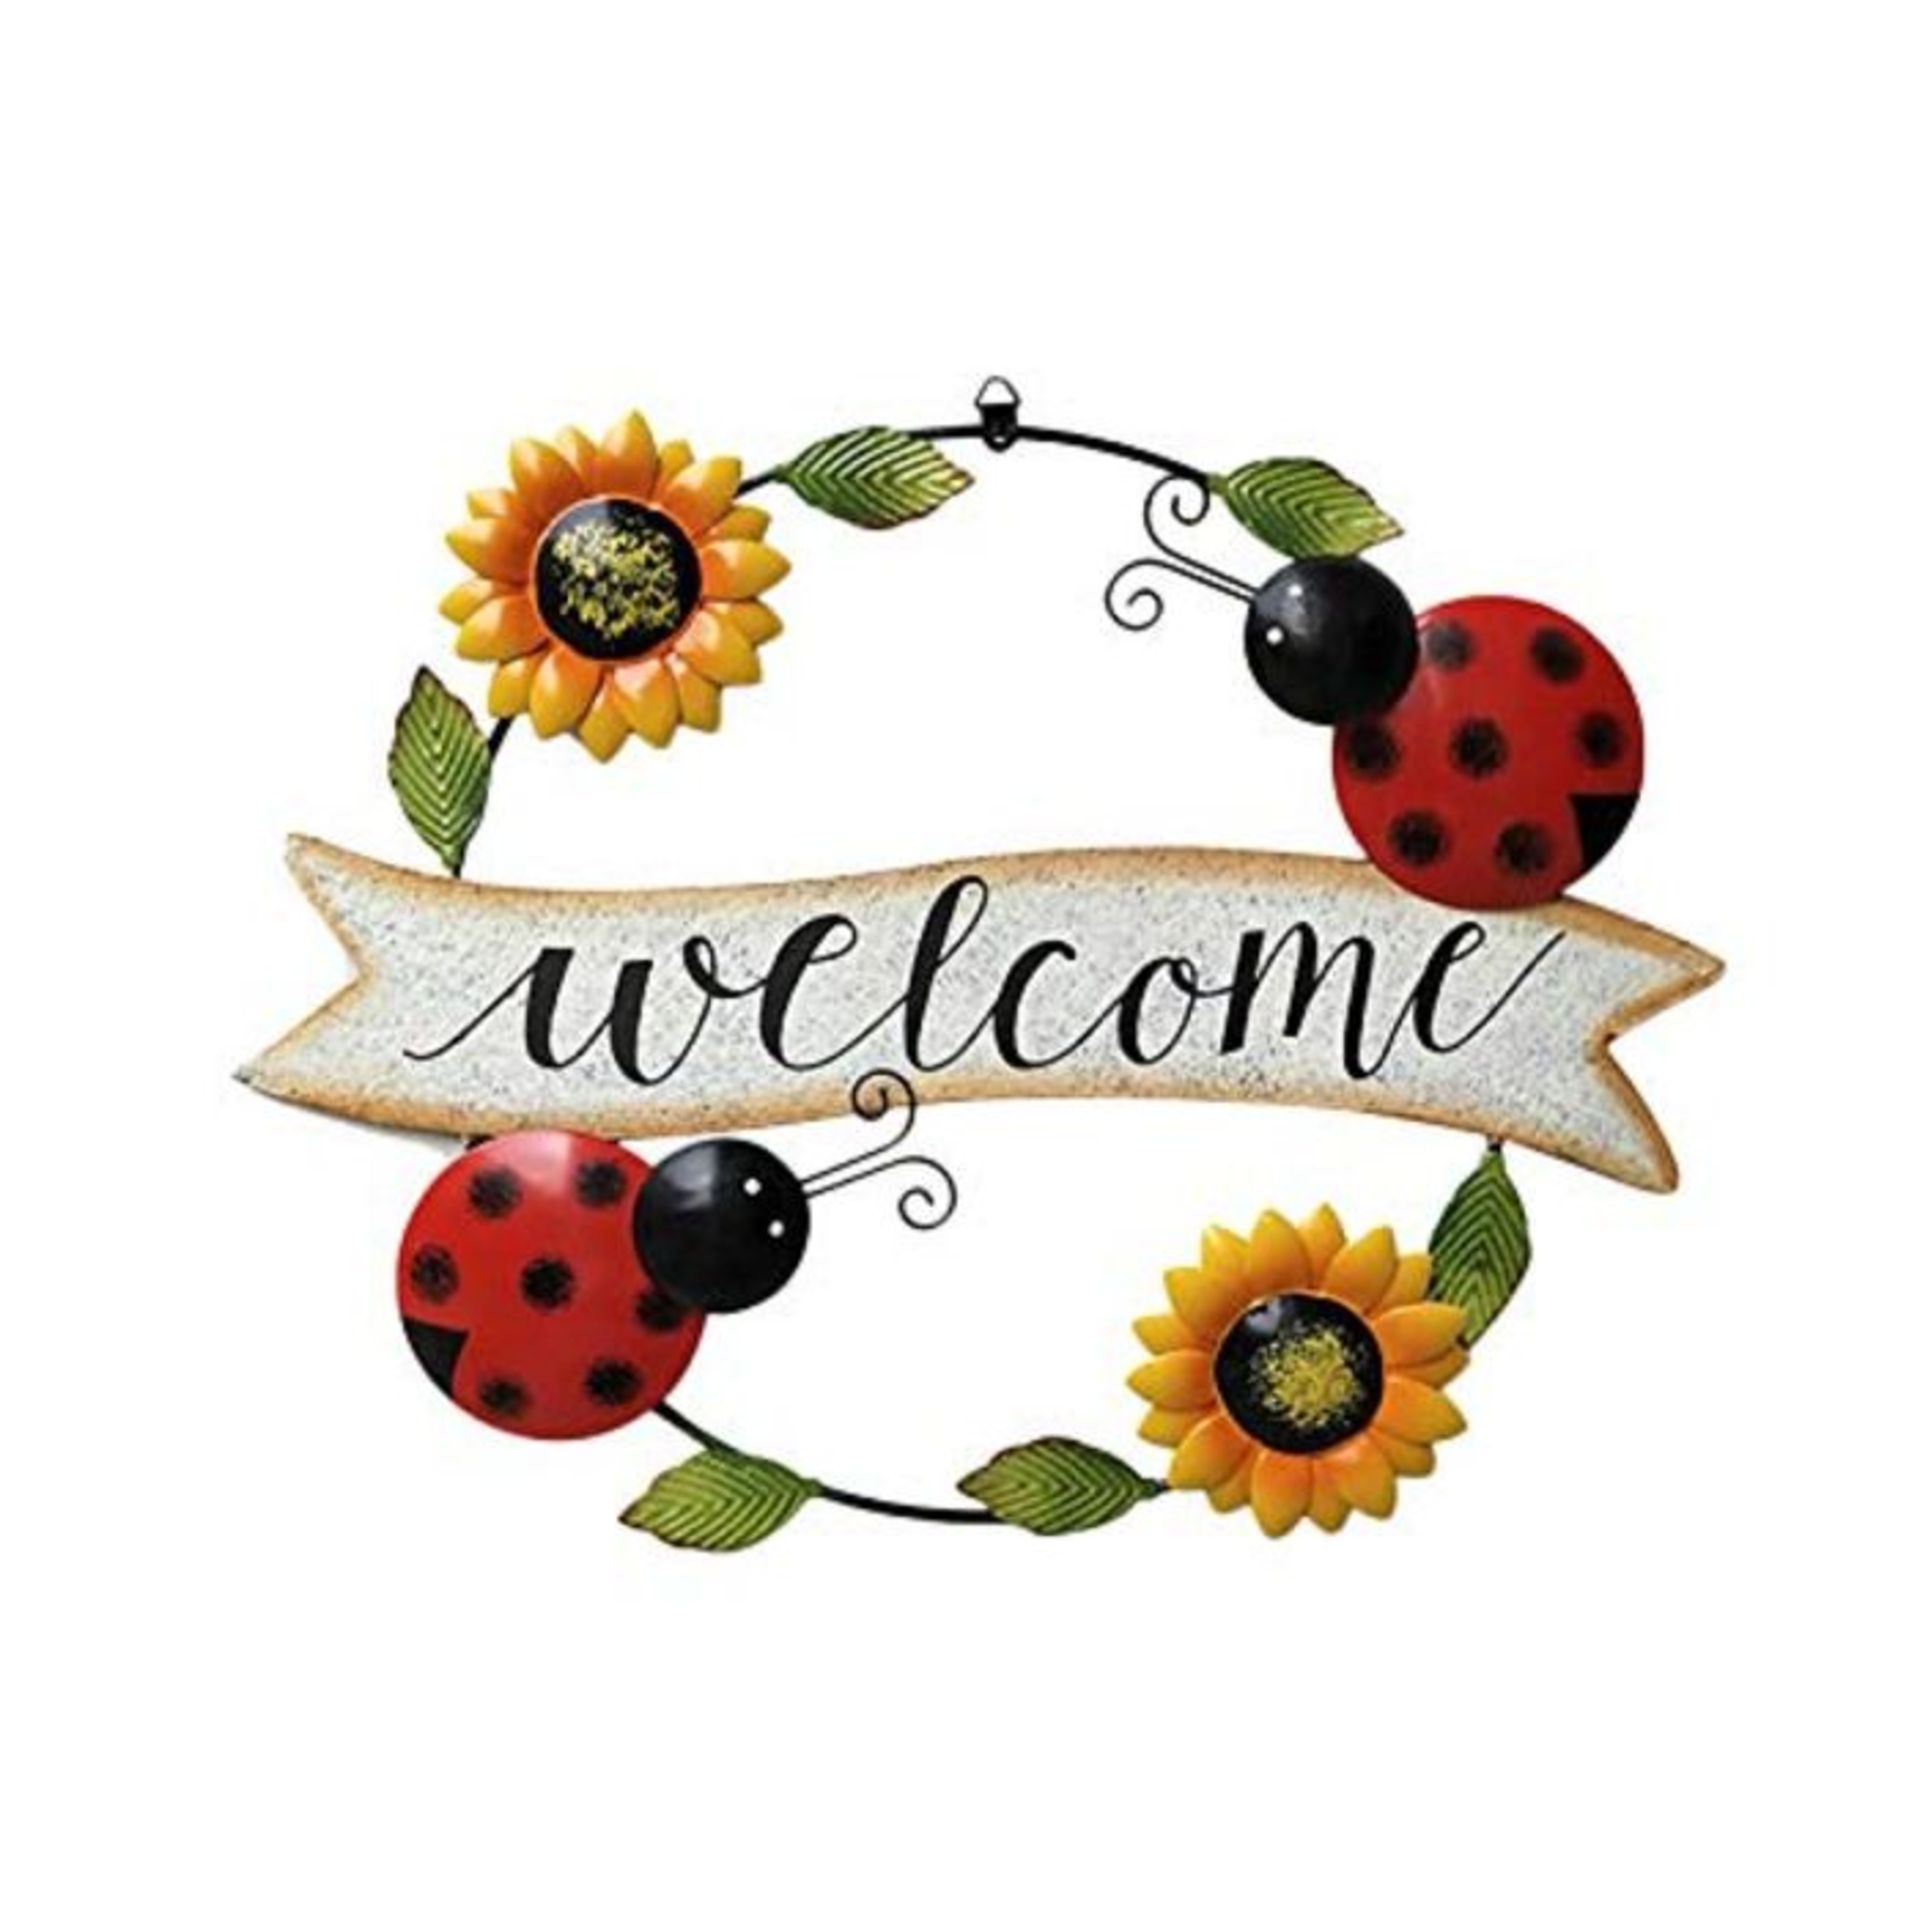 QCUTEP Vintage Hanging Sunflower Welcome Sign Handcrafts Vintage Iron Bees Sunflower W